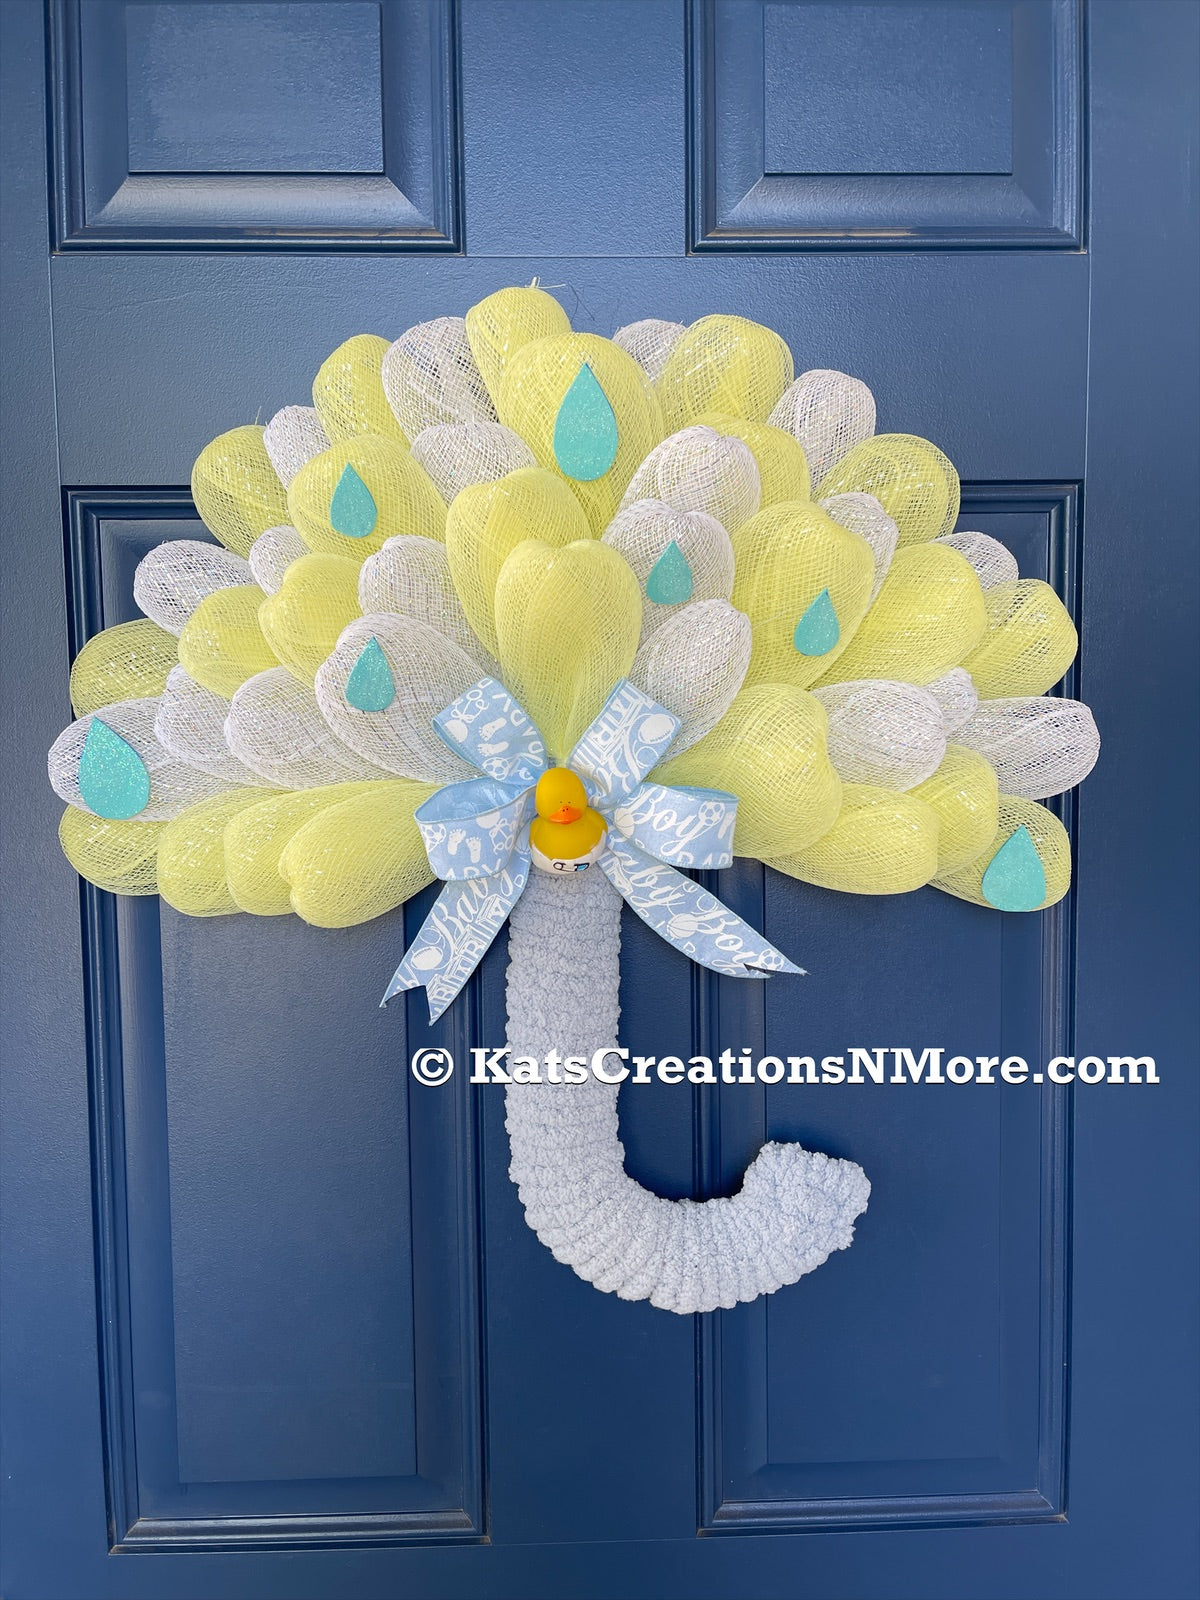 Blue, White and Yellow Deco Mesh Umbrella Wreath for Baby Boy Shower